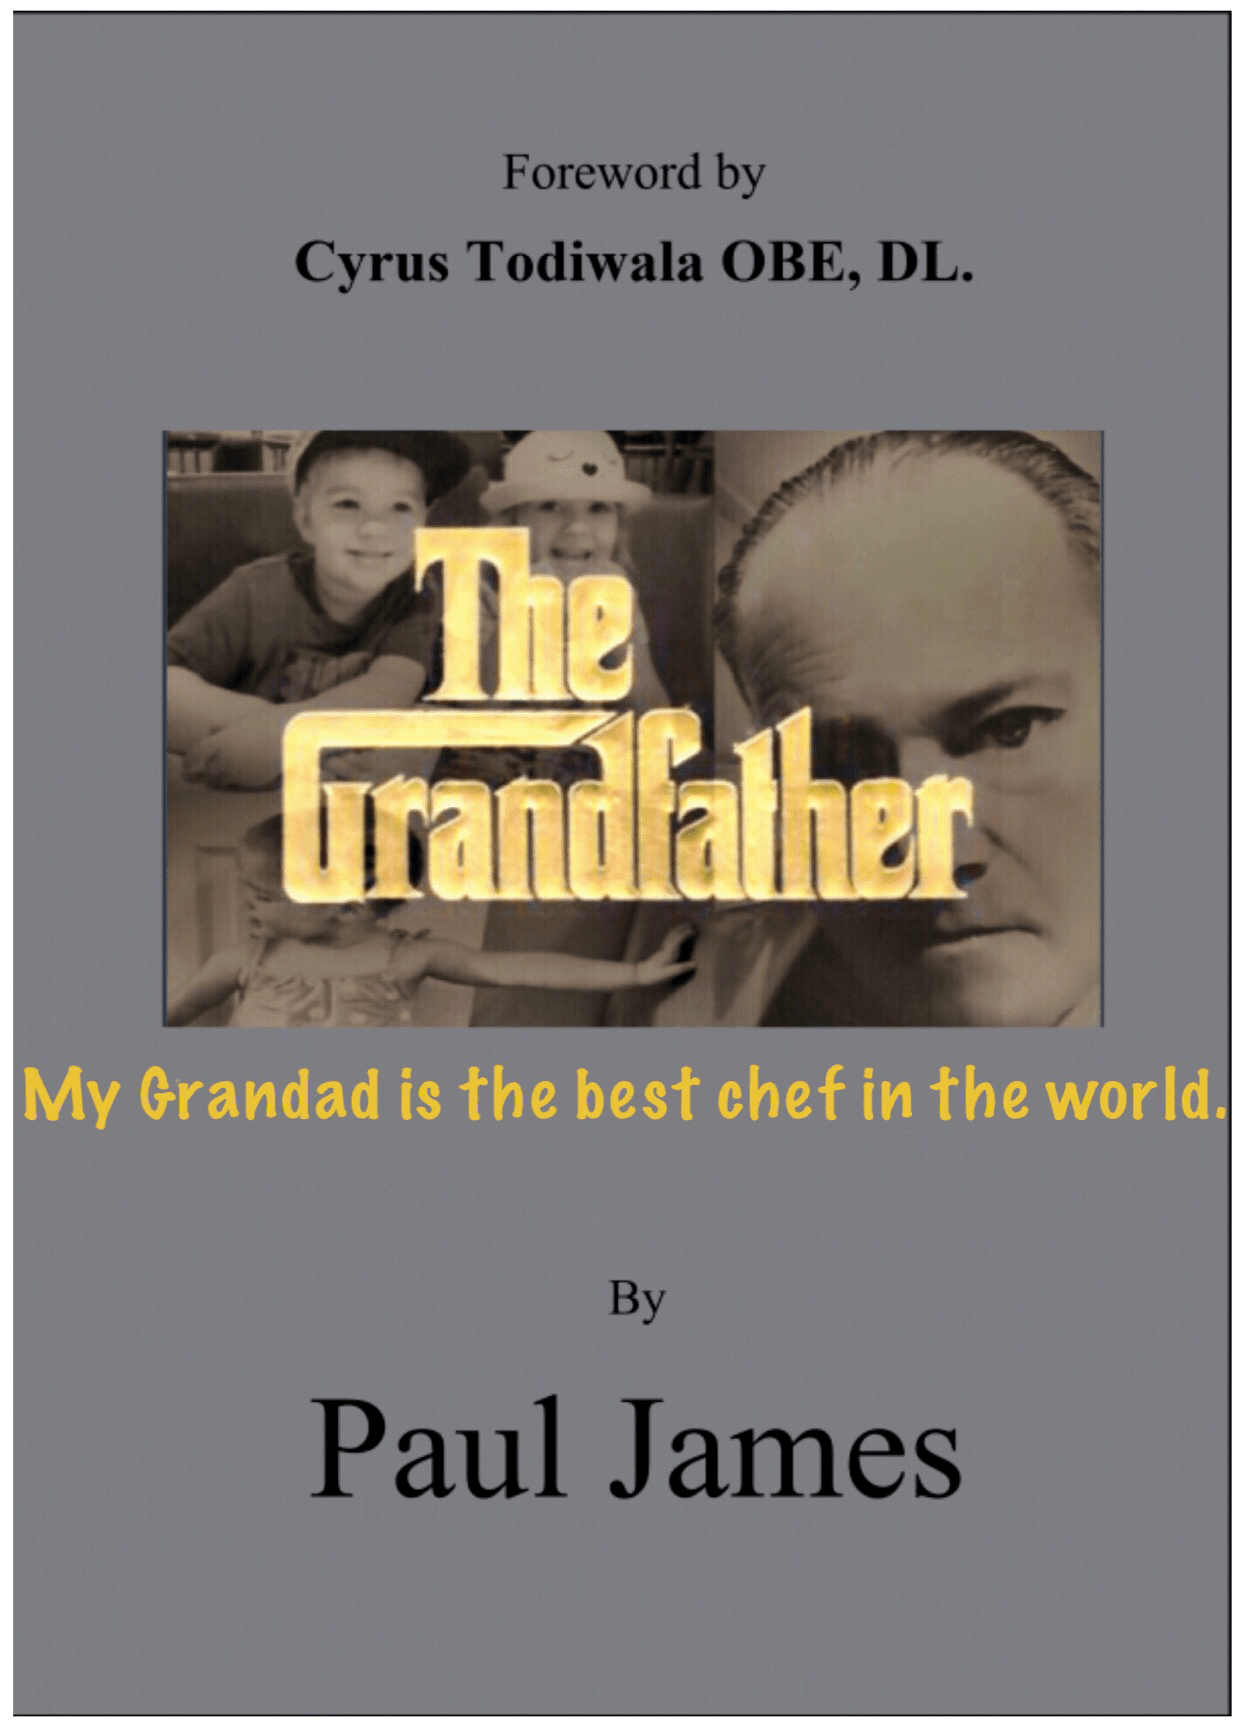 Retired professional chef Paul James and its cover of the book